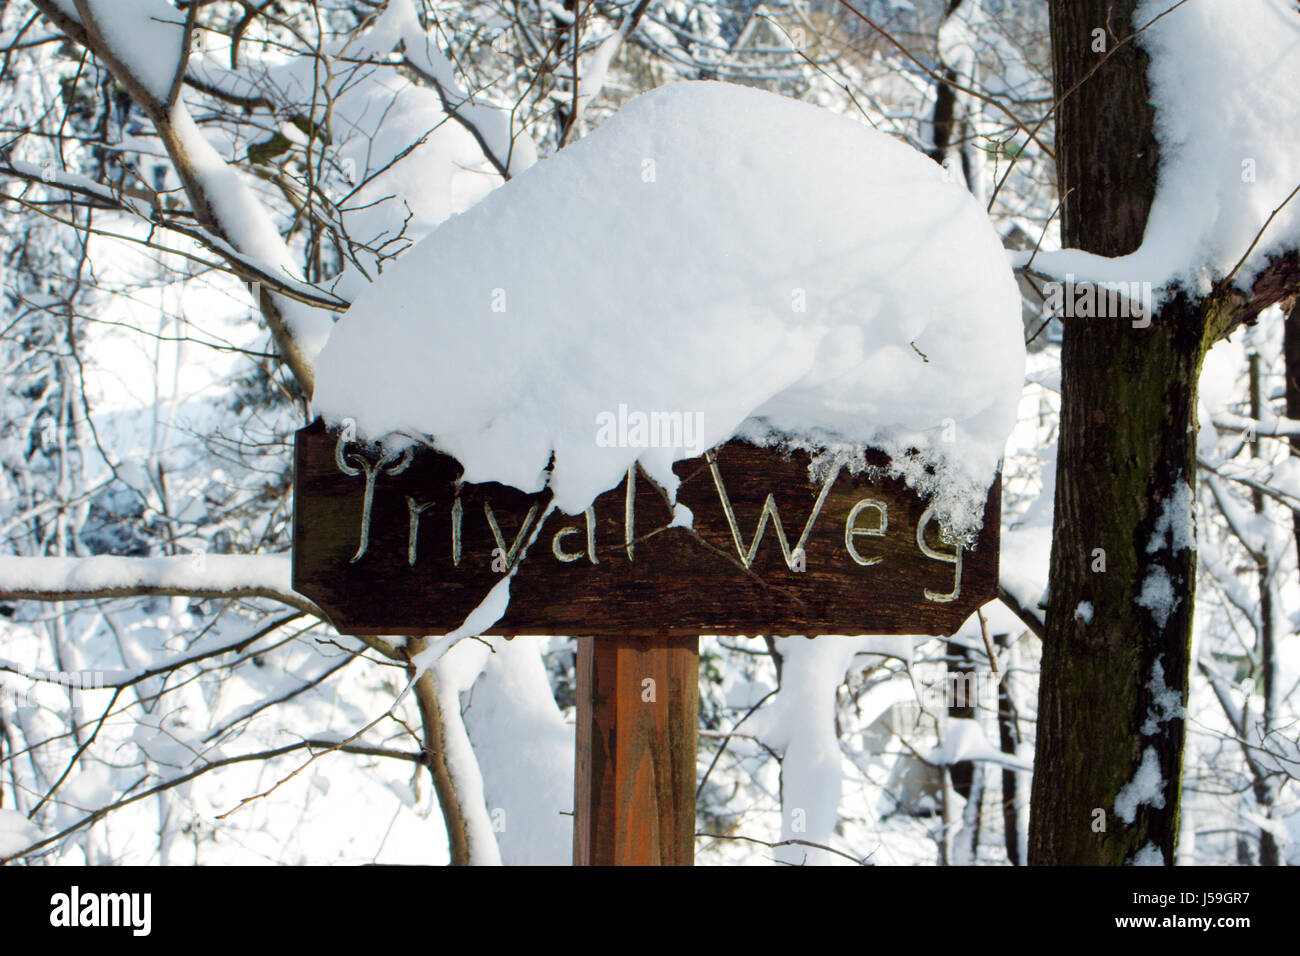 sign signal private tree trees winter wood ice signposts armour hint path way Stock Photo